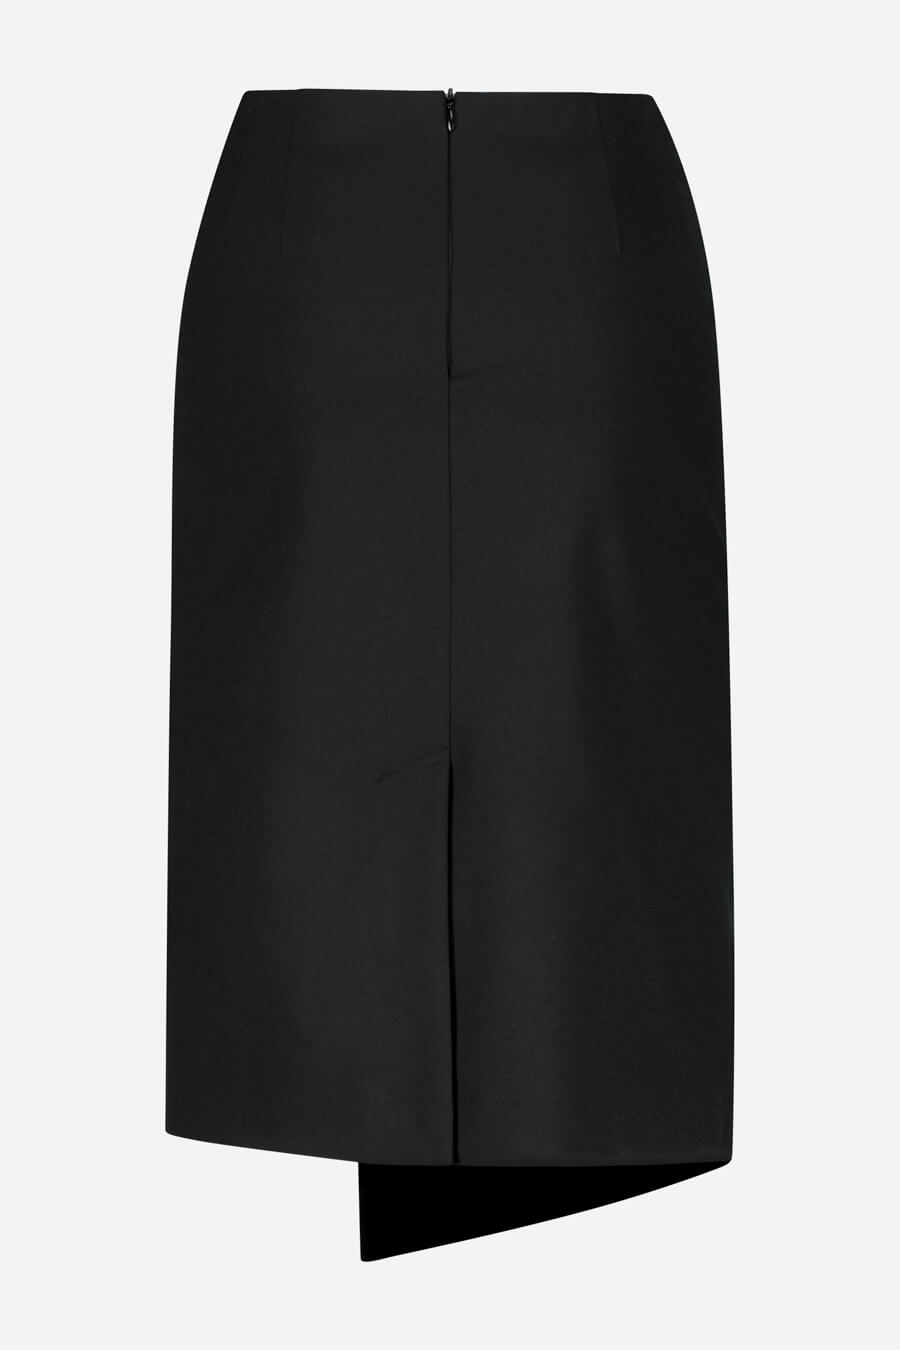 Pencil skirt with asymmetrical panel in black | D2line